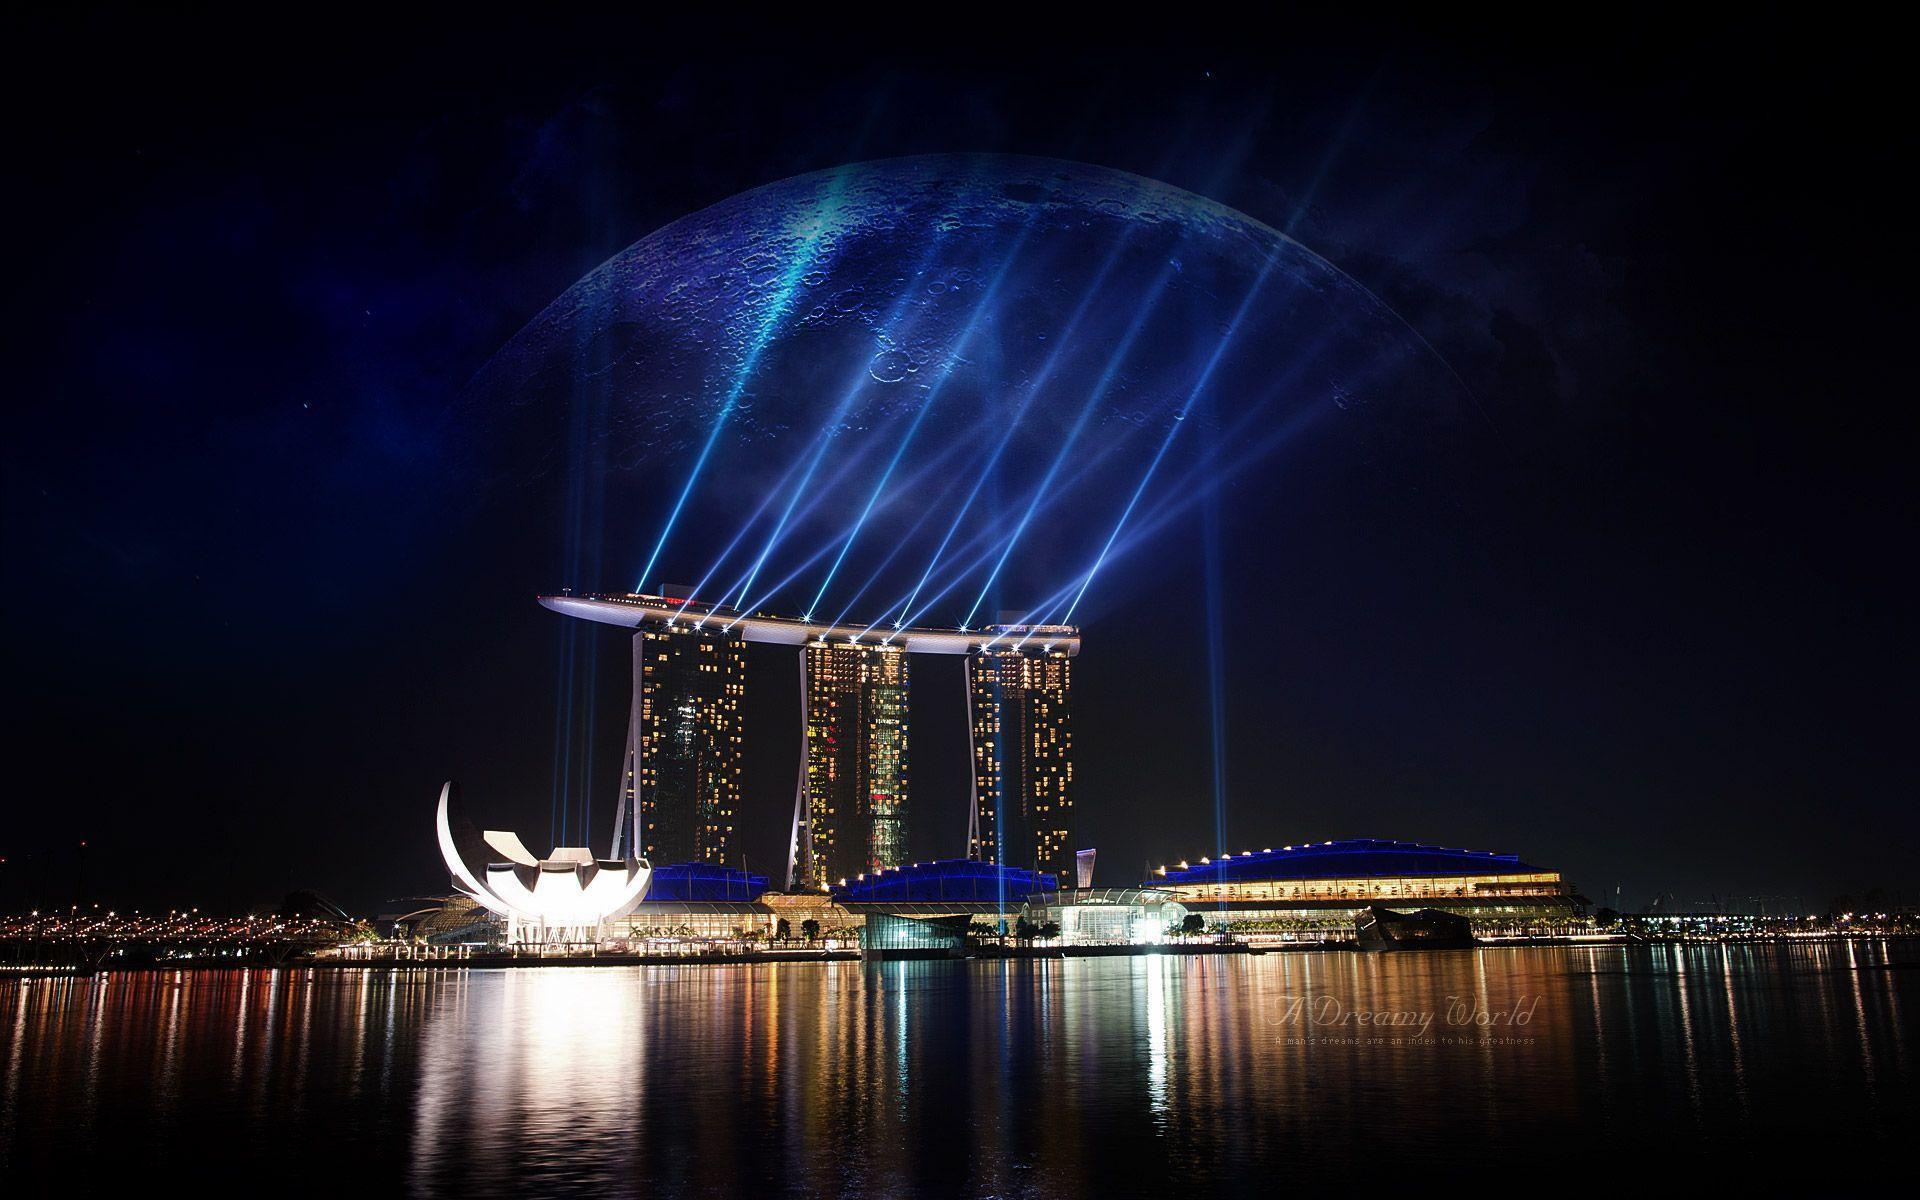 Wallpaper Tagged With SINGAPORE. SINGAPORE HD Wallpaper